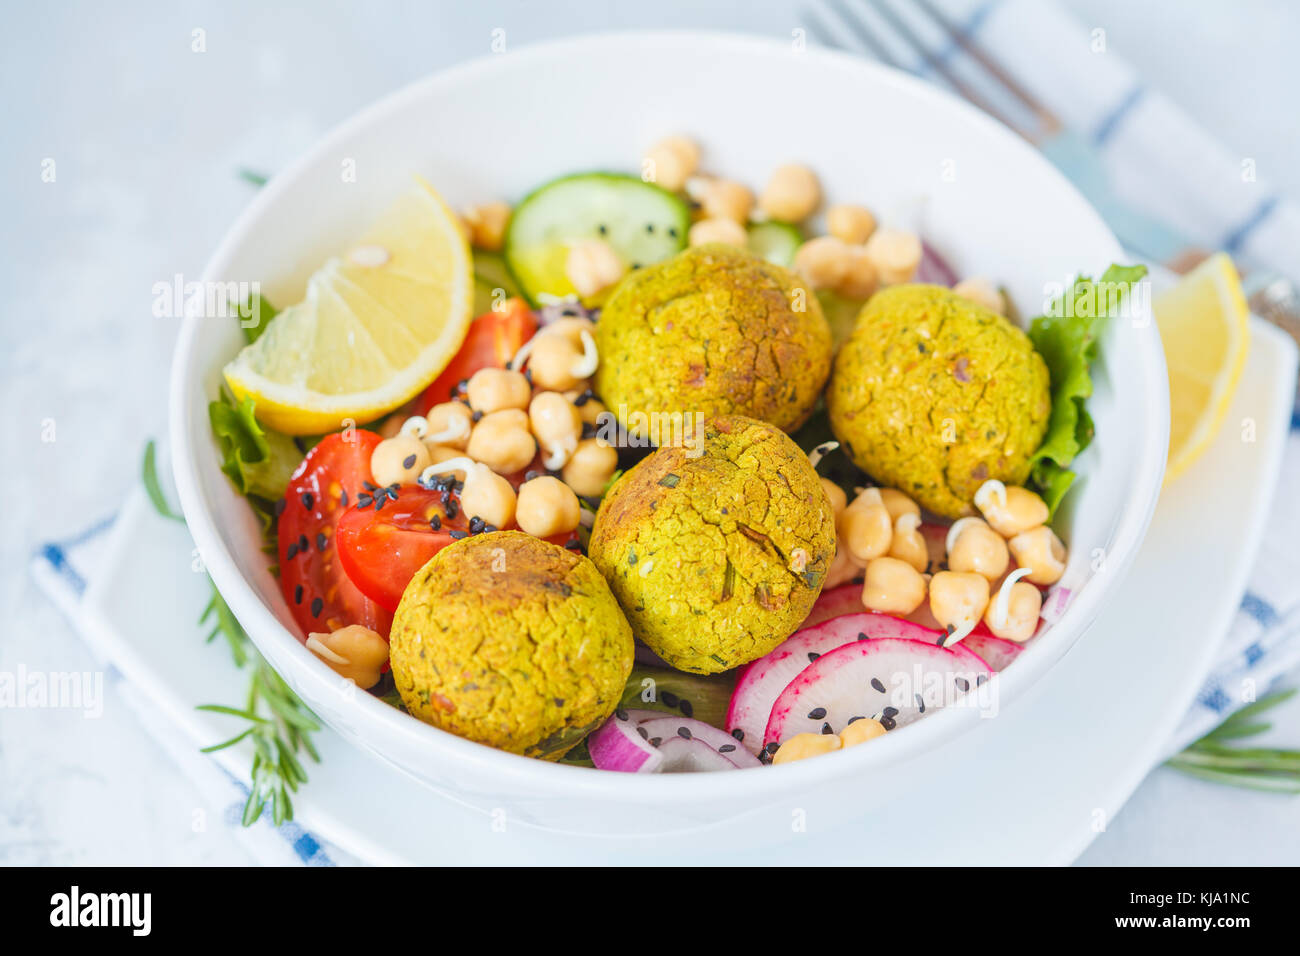 Baked falafel salad with vegetables and sprouted chickpeas. Vegan Healthy Food Concept. Stock Photo